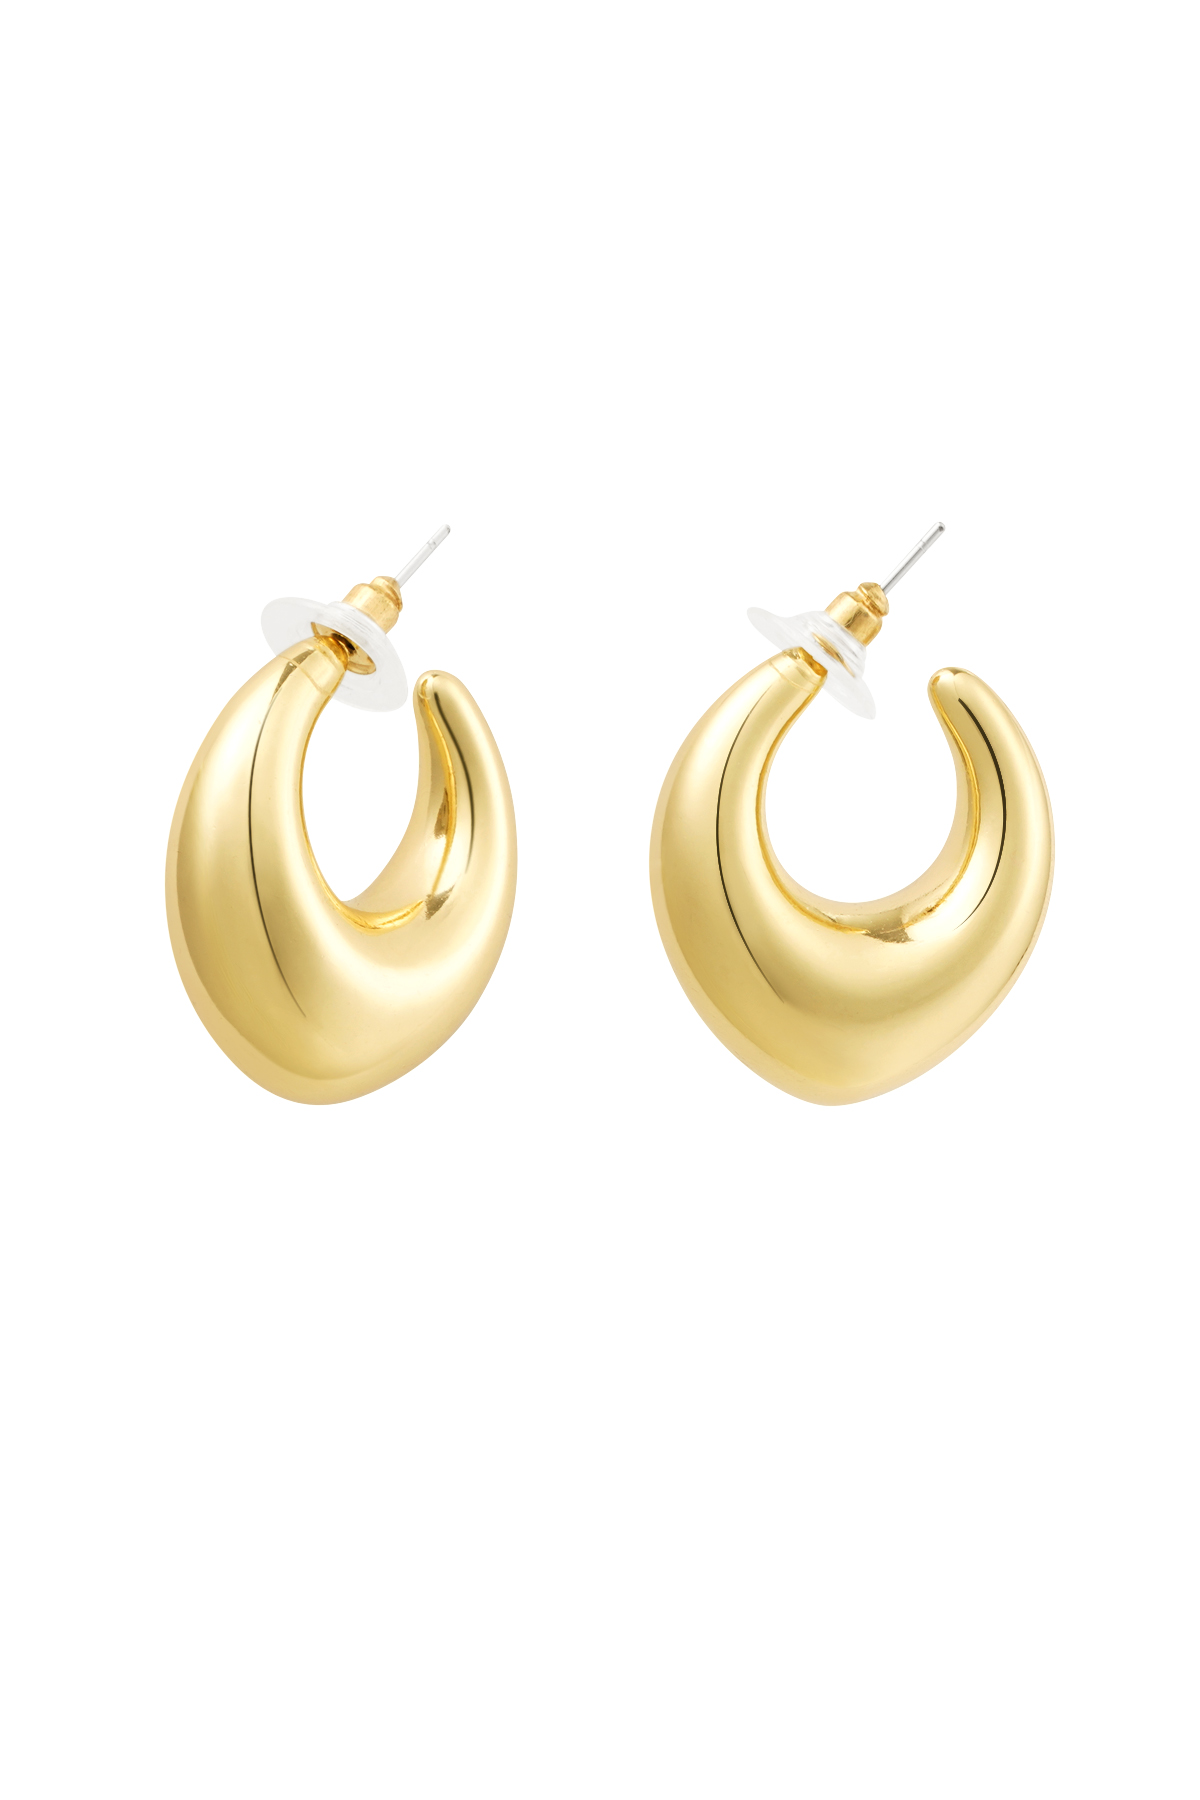 Earrings pointed twist - gold h5 